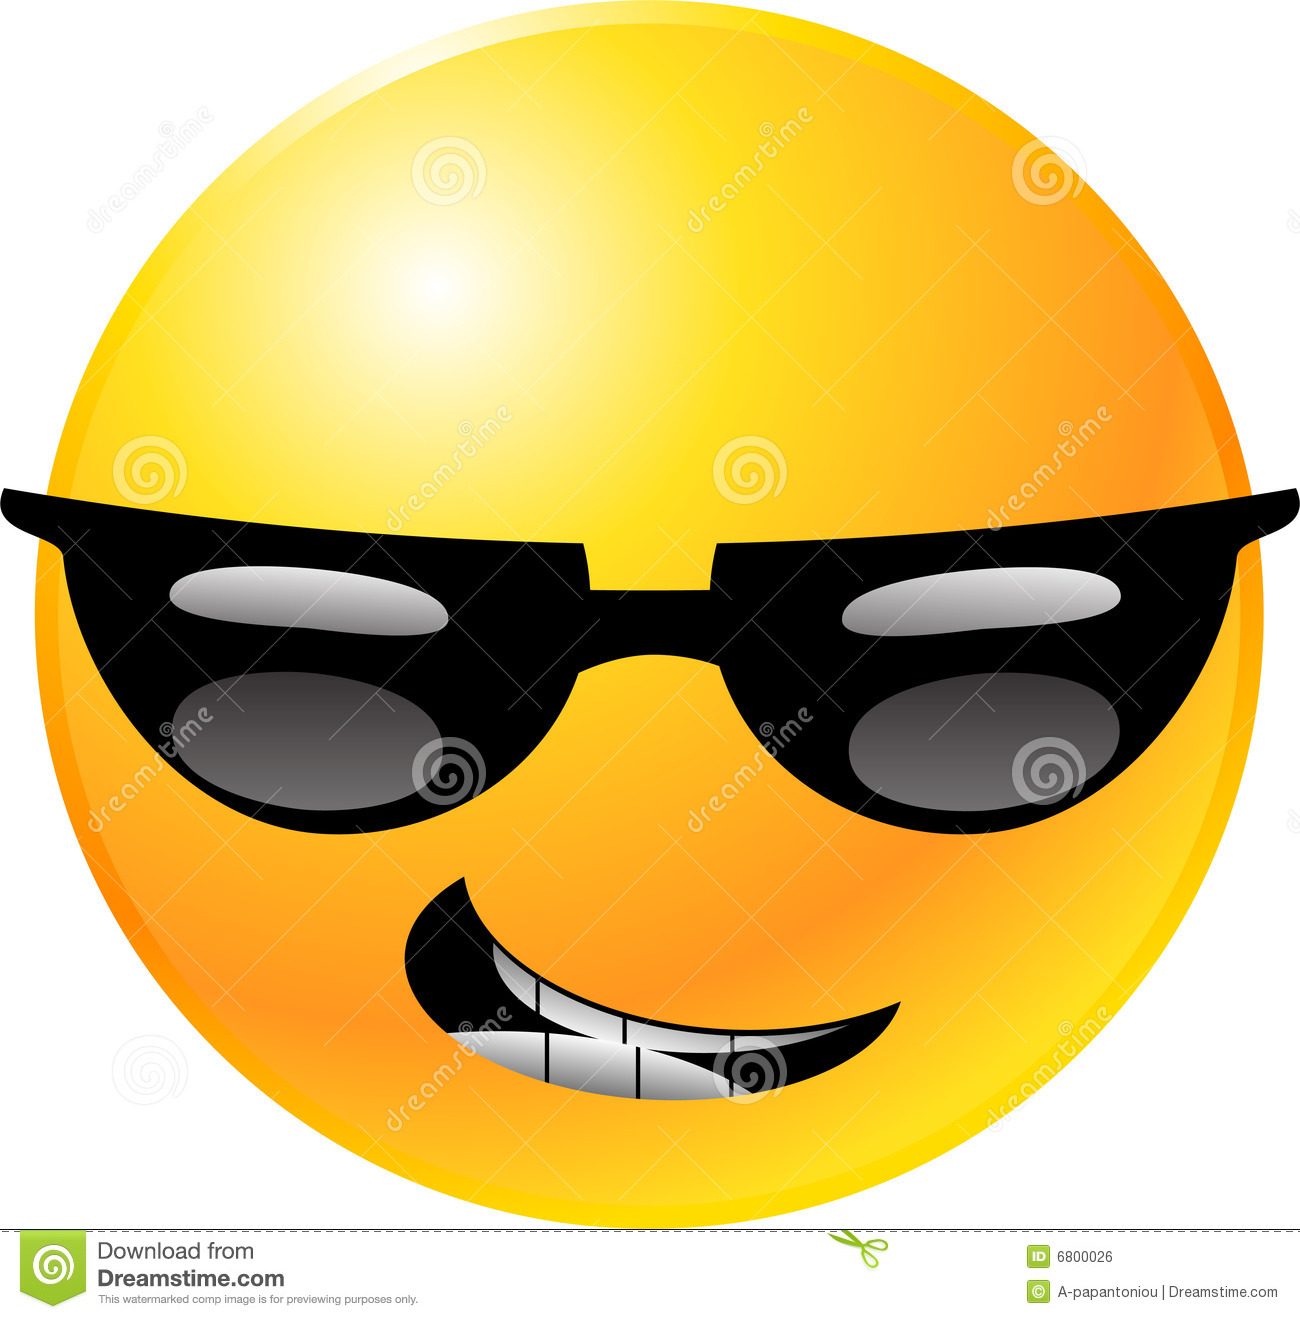 Smiley Face Thumbs Down Clipart   Clipart Panda   Free Clipart Images